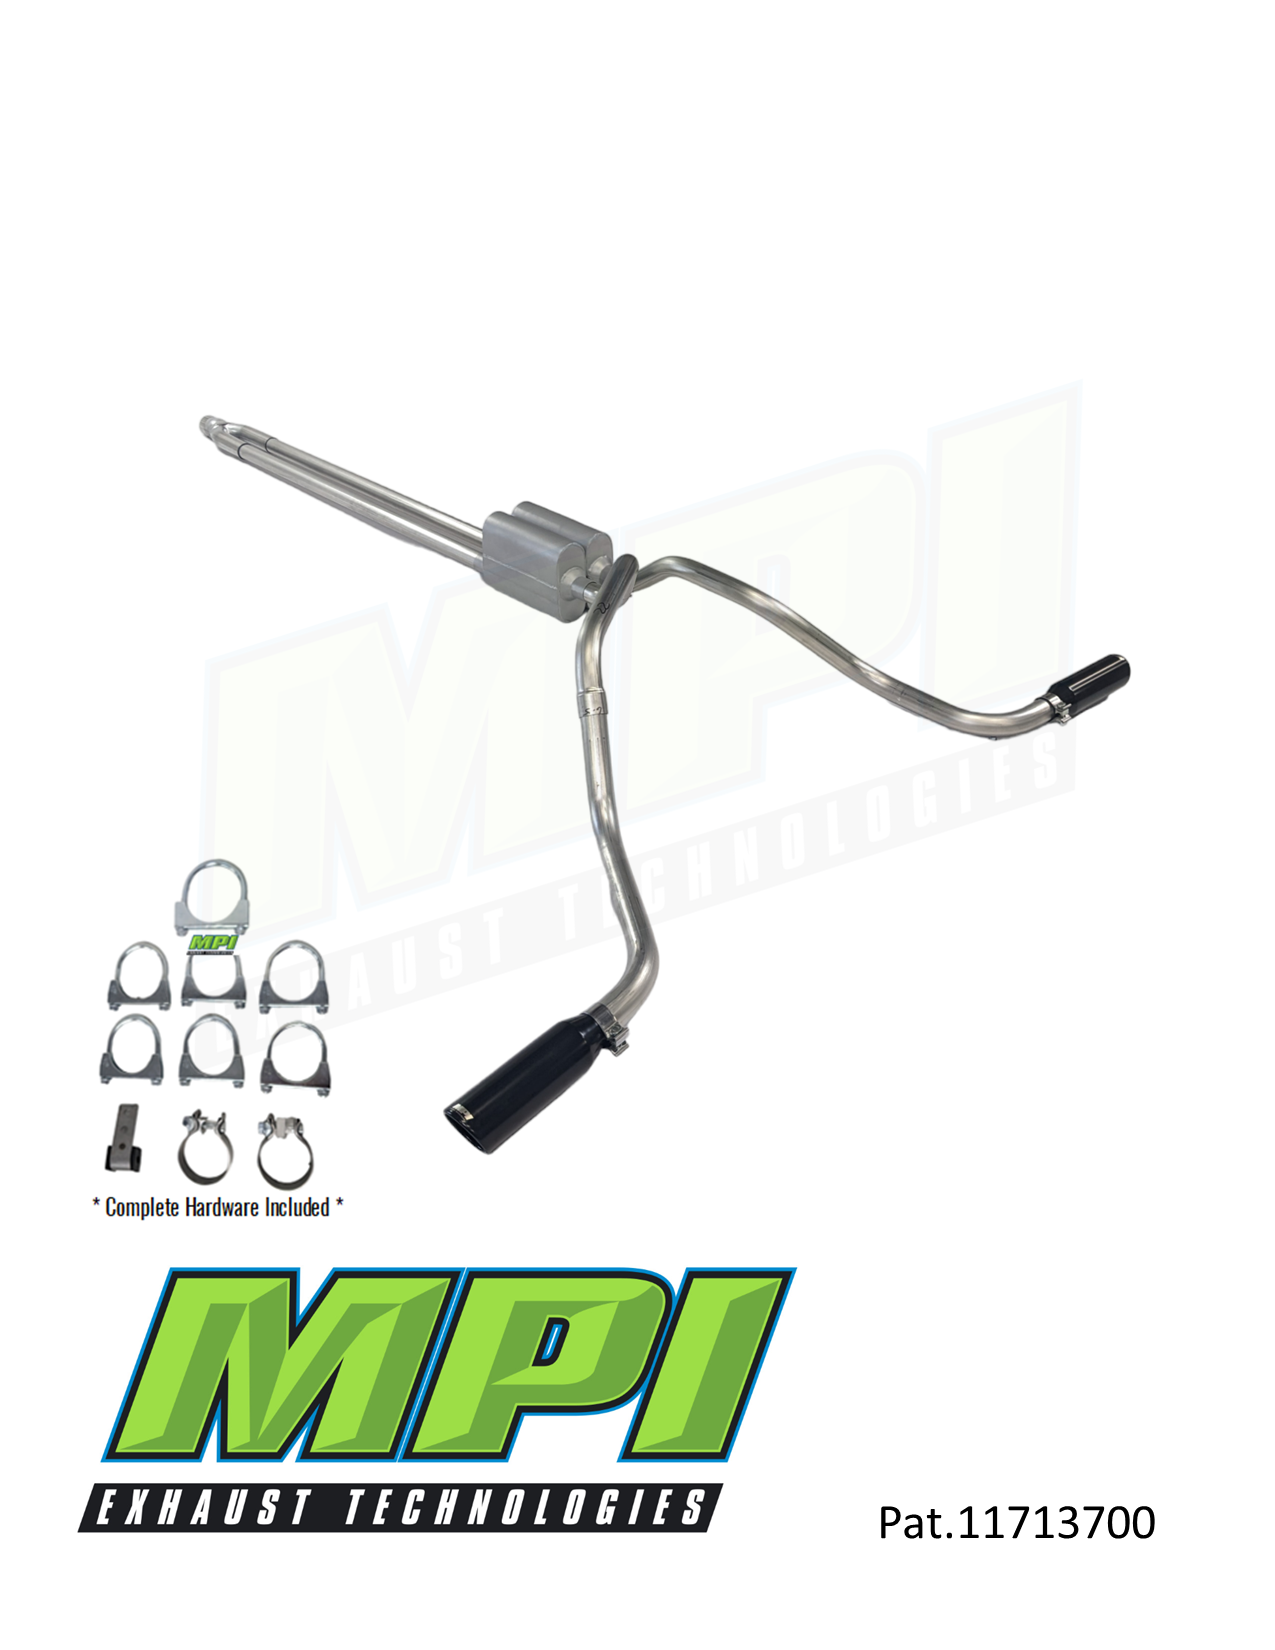 GM 6.0L 2014-2018 Truck Dual Exhaust Kits - Clamp-on System